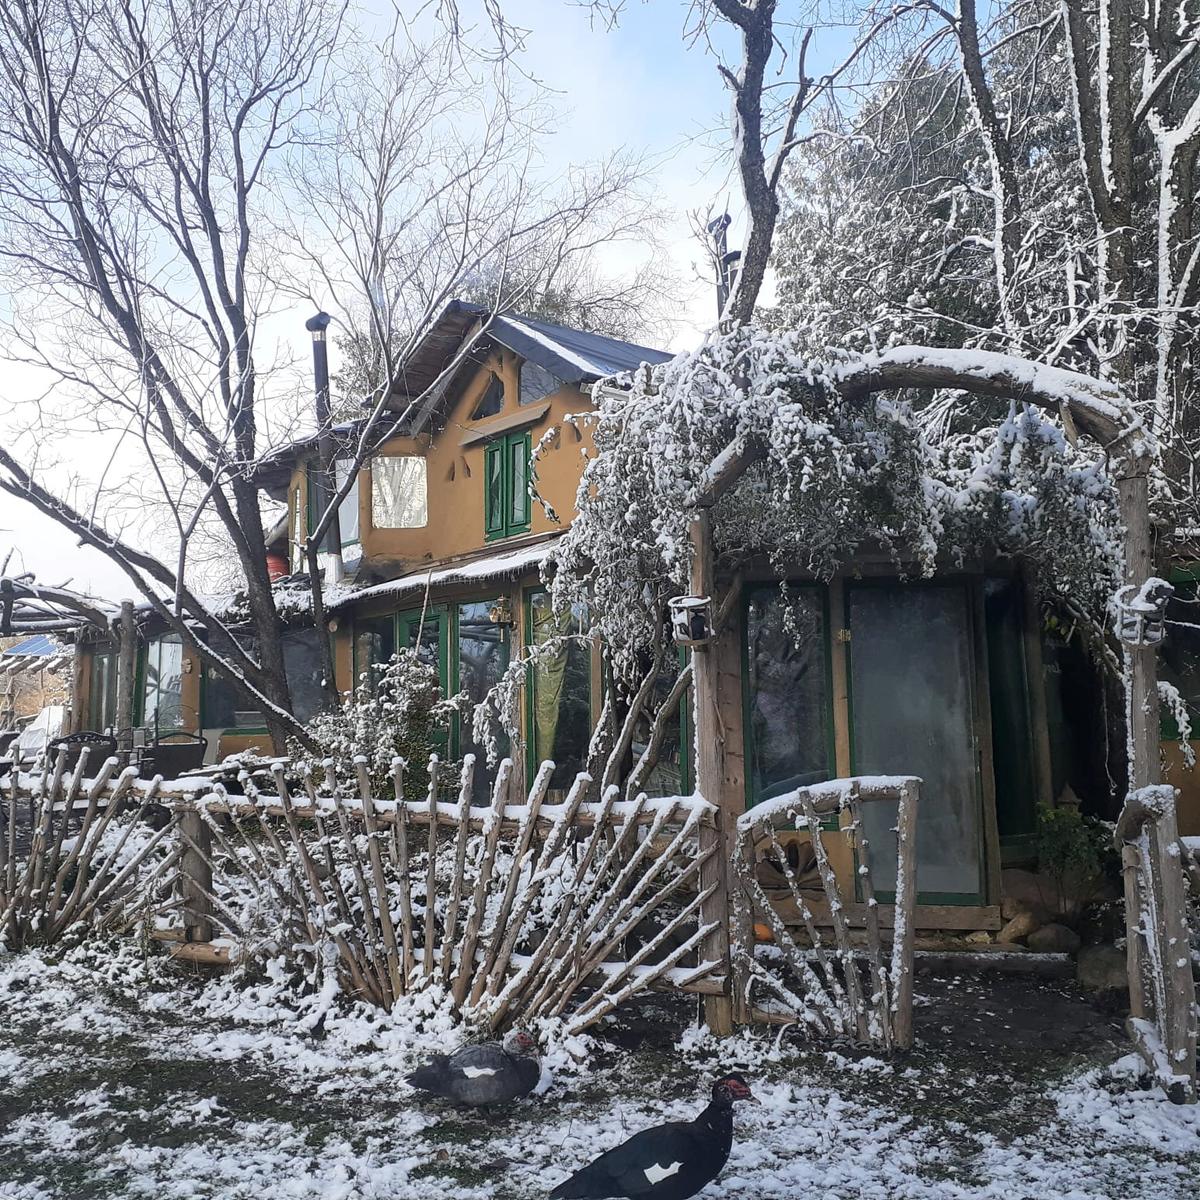 The 'cob home' in winter. (SWNS)